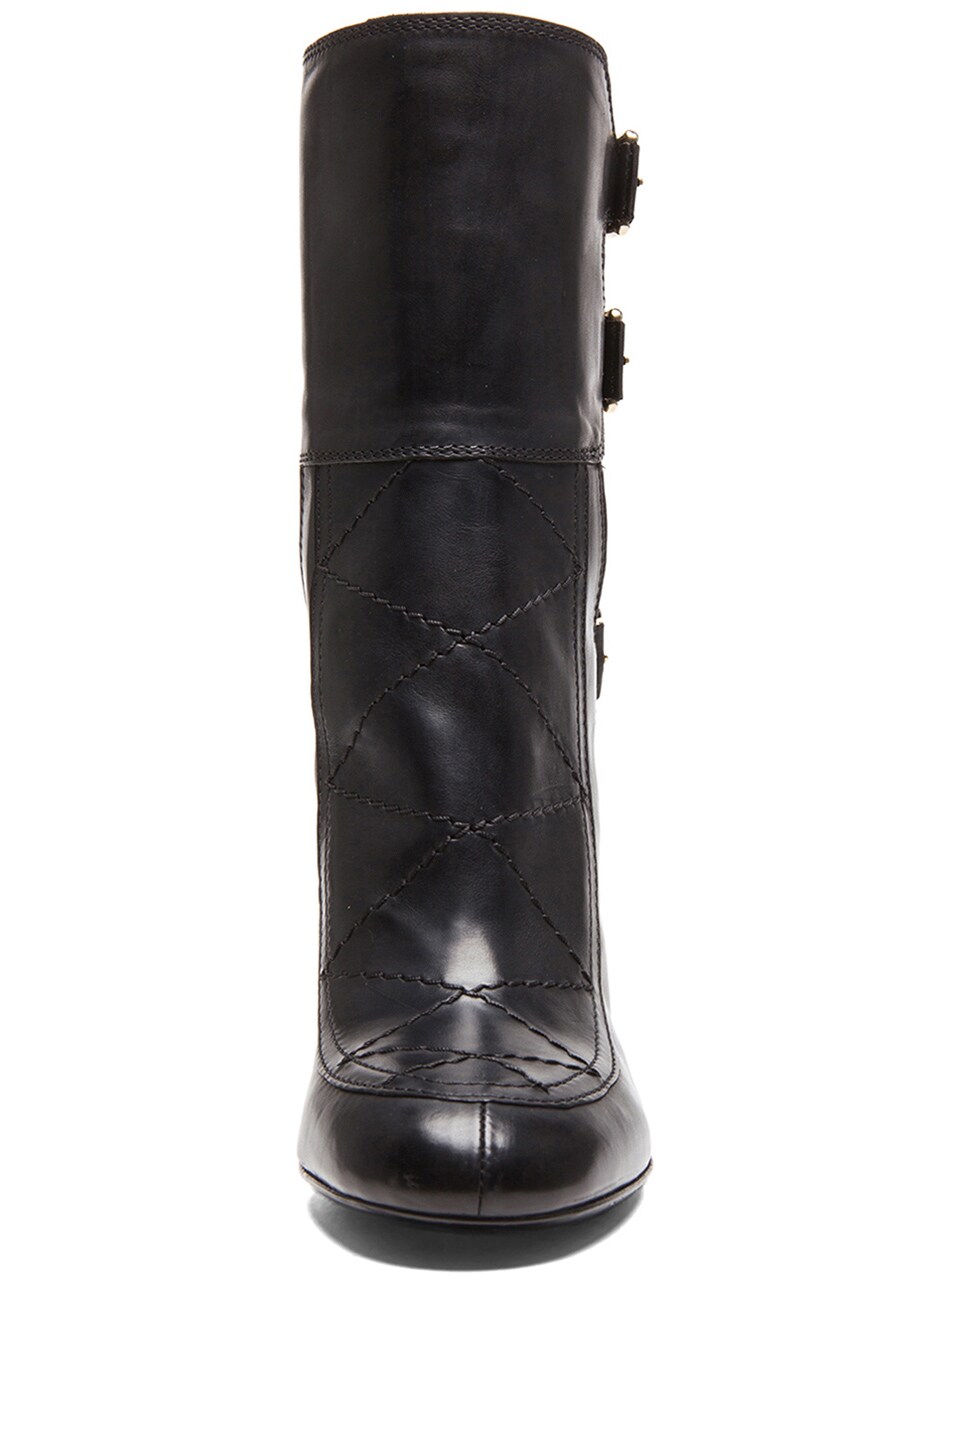 LAURENCE DACADE Merli Calfskin Leather Boots In Black Shiny Calf